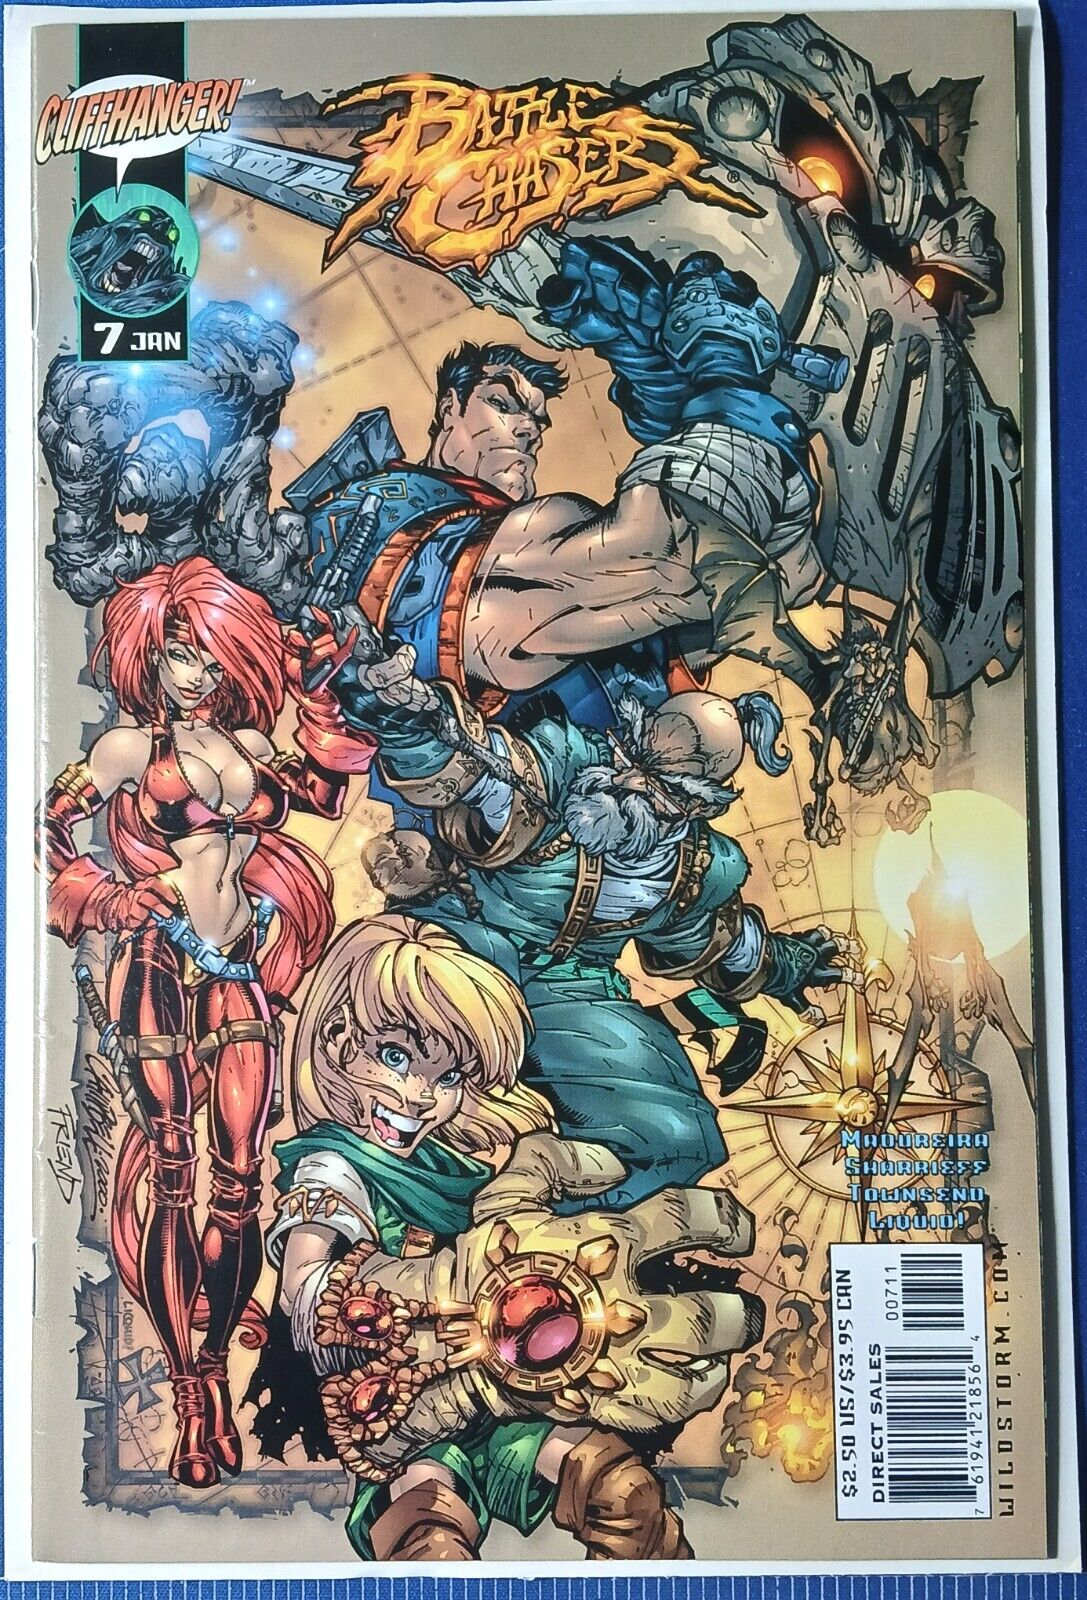 Cliffhanger Battle Chasers #7 Campbell Variant Cover Madureira 2001